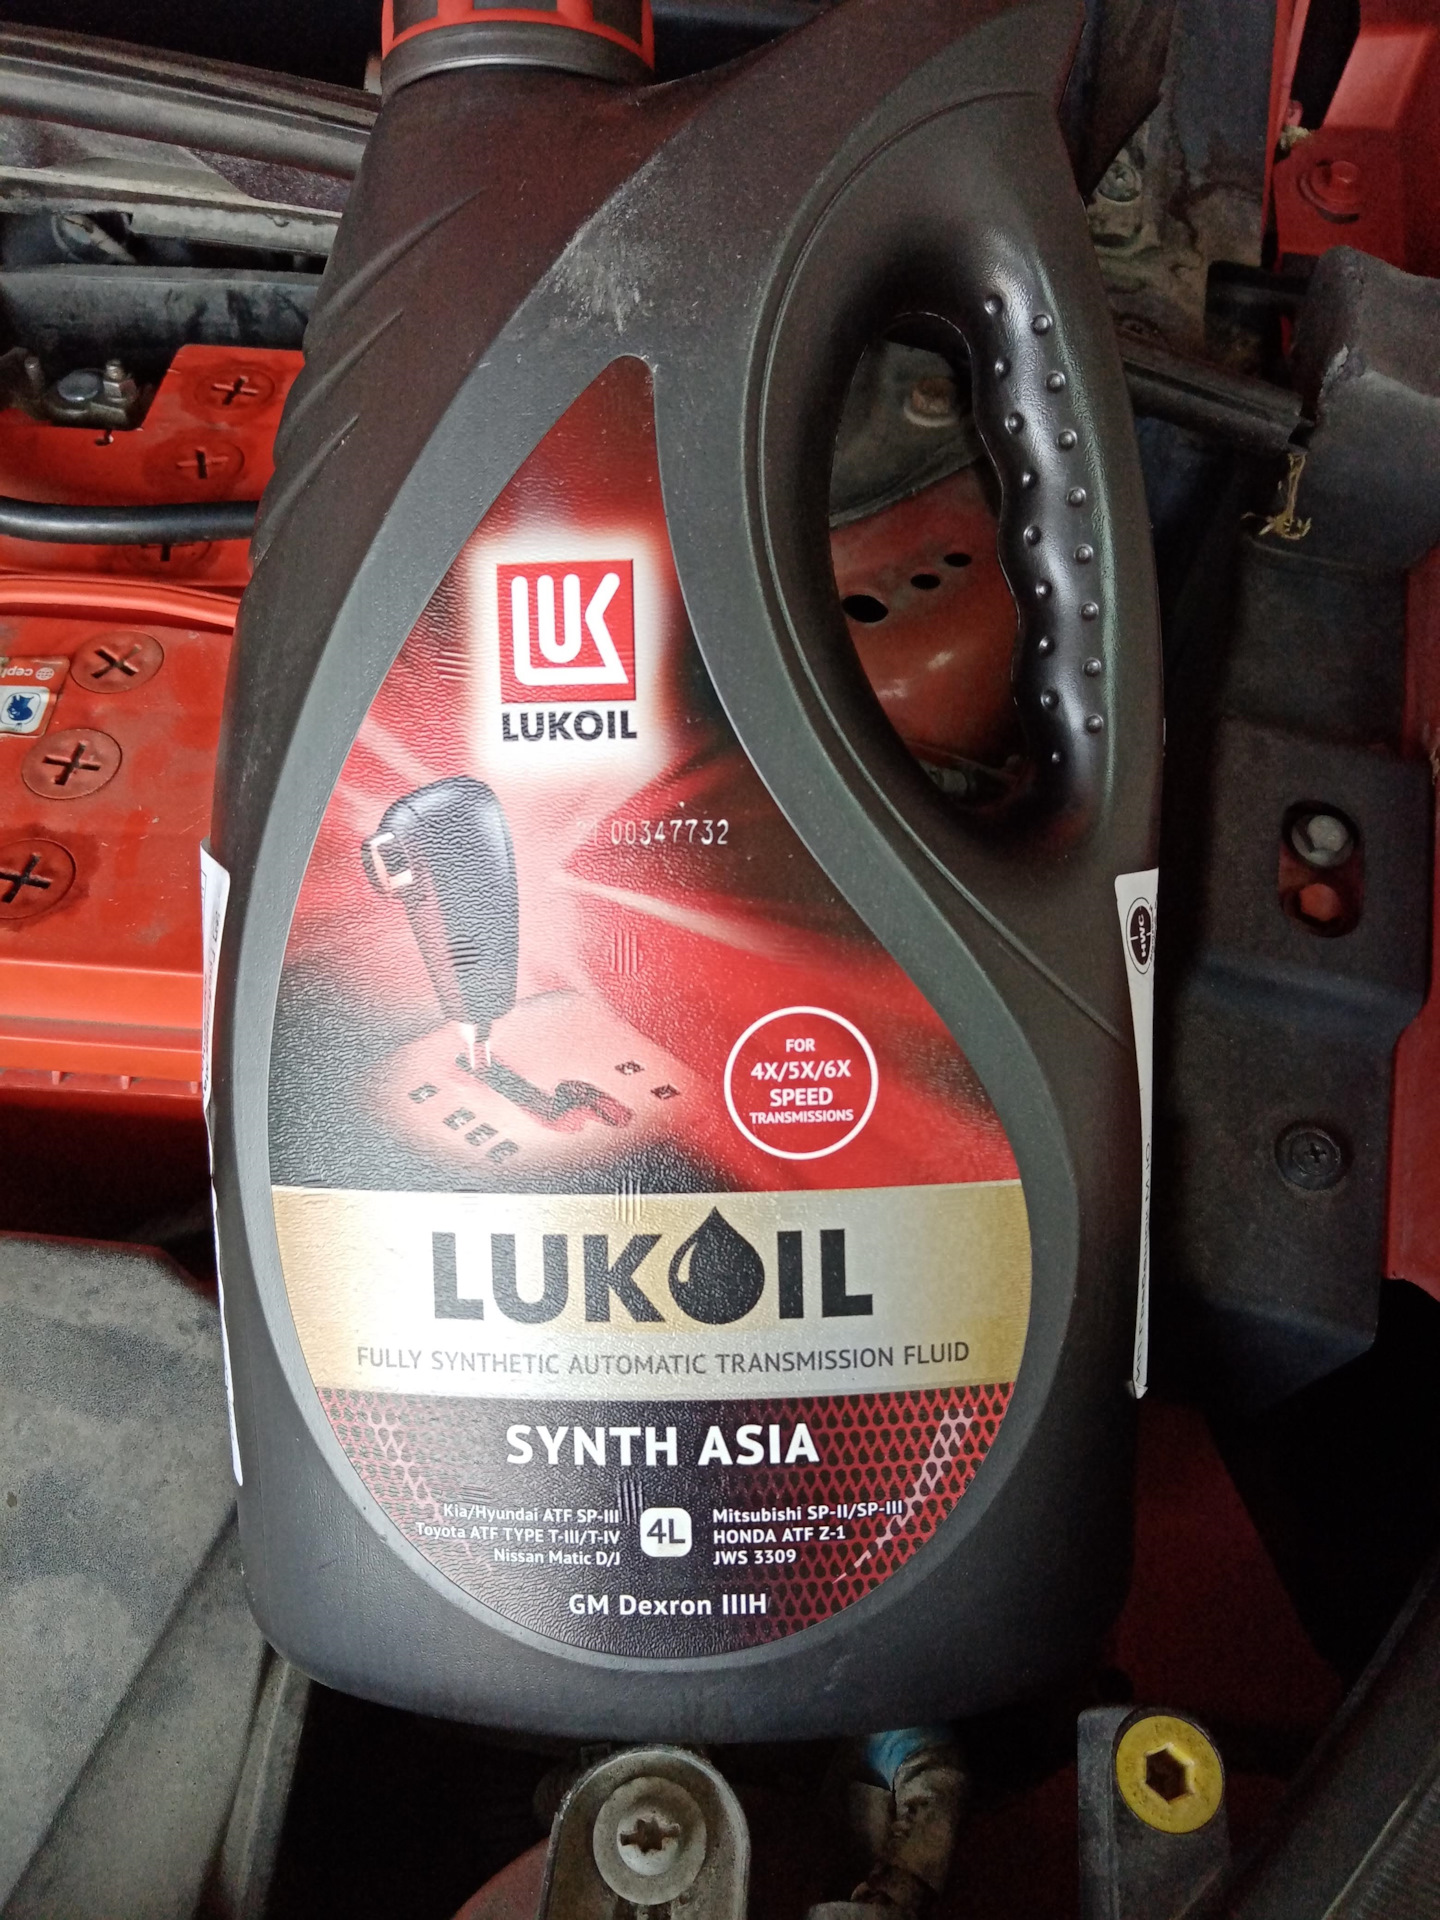 Лукойл asia. Масло Лукойл АТФ 3309. Lukoil ATF Synth Asia. Масло ГУР ATF Лукойл. Lukoil ATF Synth 6 216.